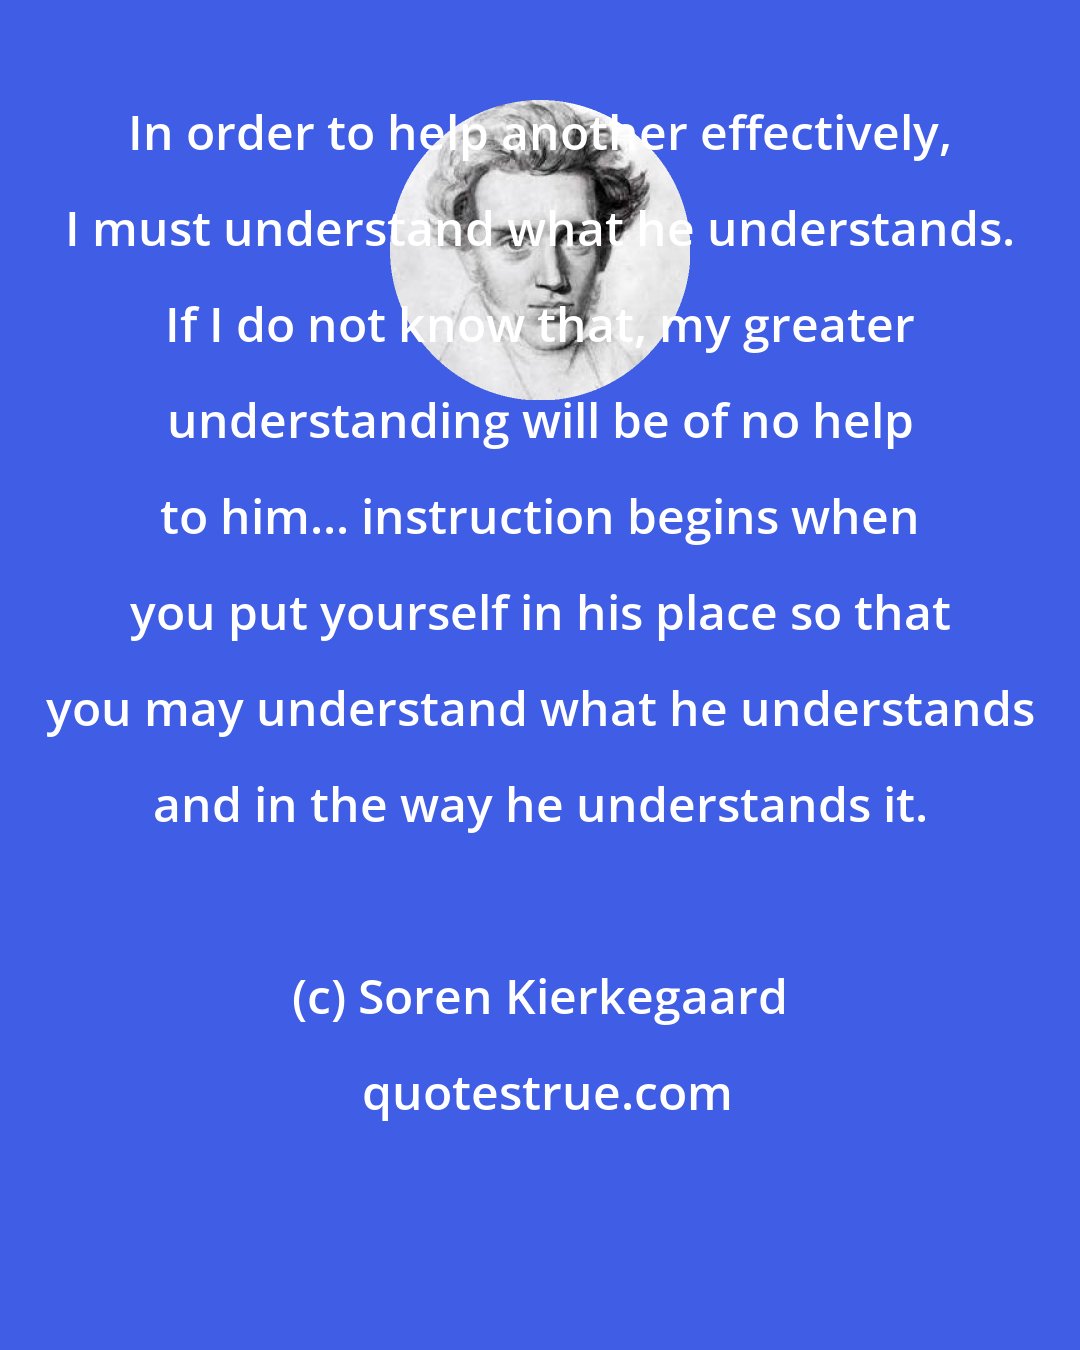 Soren Kierkegaard: In order to help another effectively, I must understand what he understands. If I do not know that, my greater understanding will be of no help to him... instruction begins when you put yourself in his place so that you may understand what he understands and in the way he understands it.